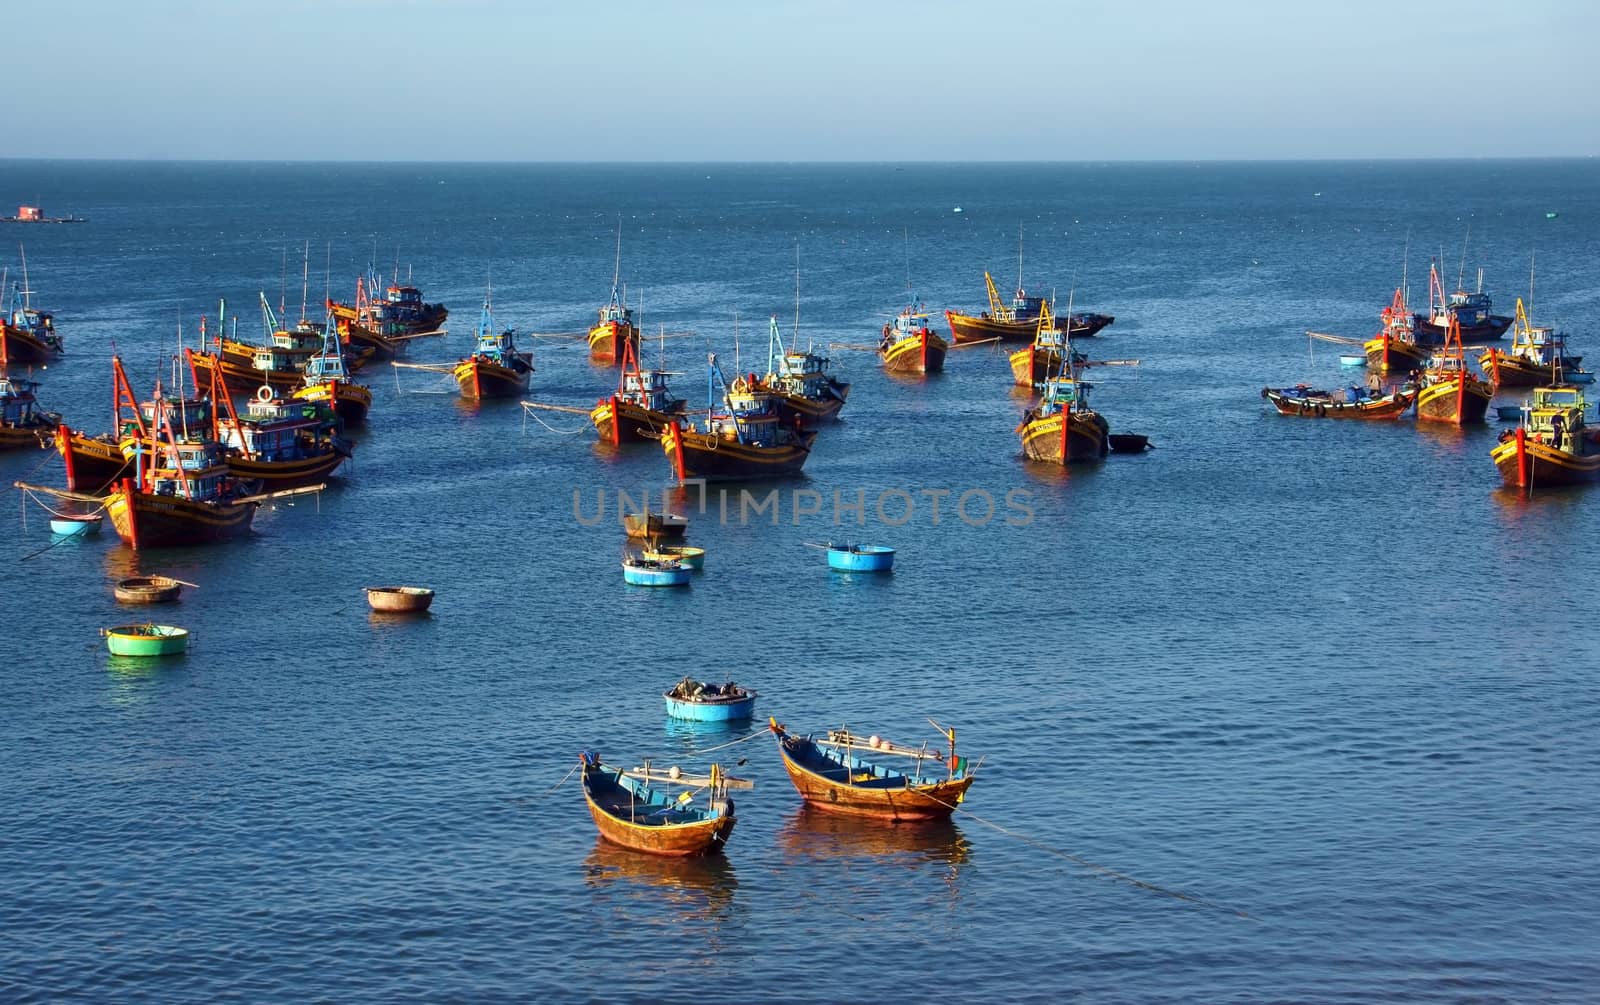 In fishing boat 's Mui Ne, every early morning of day,   basket boat, pirogue, vessel, coracle  attached with a large number. That day was beautiful, filled with golden light.So nice seascape